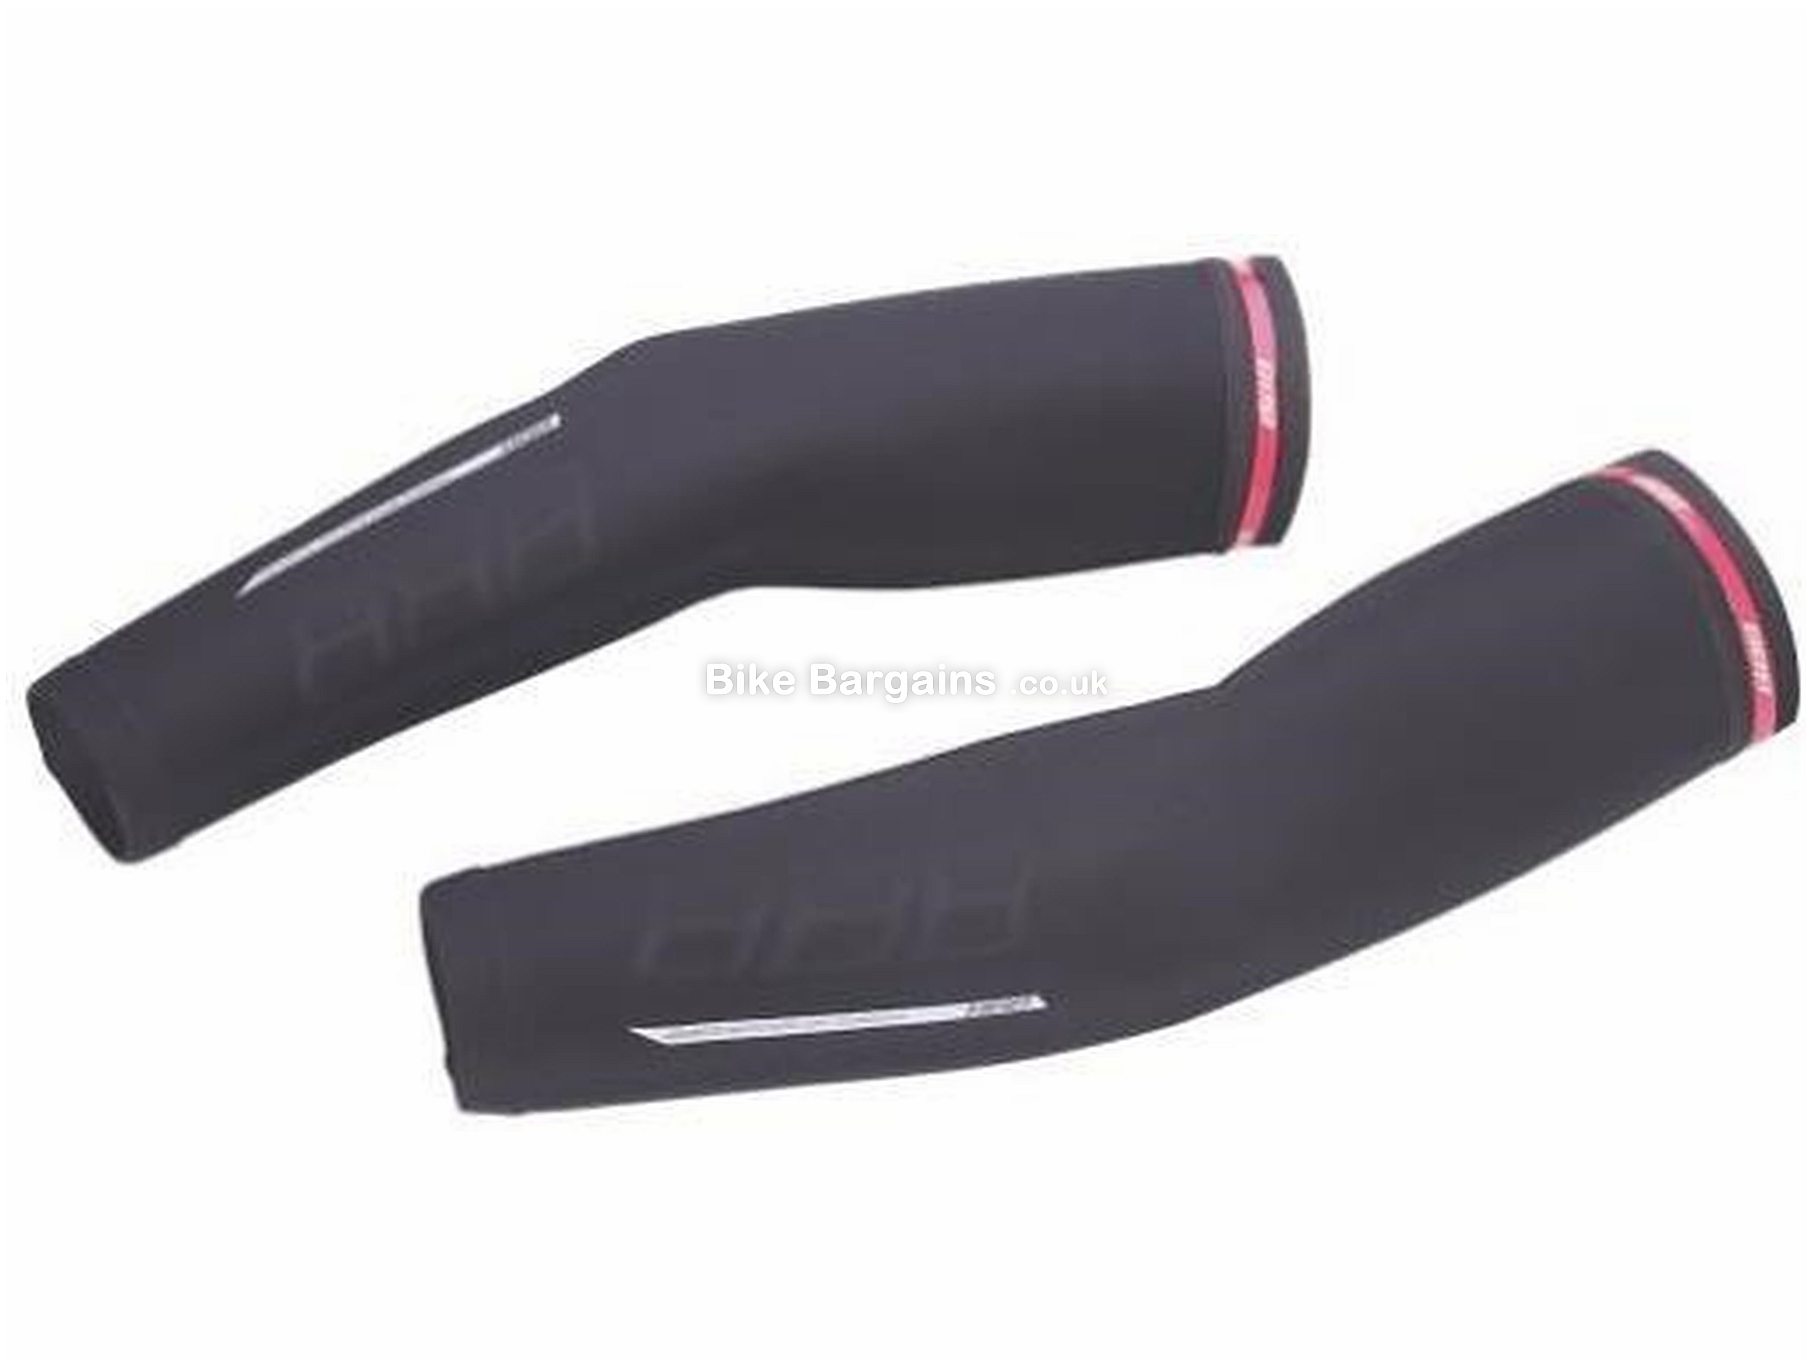 Download BBB BBW-359 ColdShield Arm Warmers 2016 was sold for £14 ...